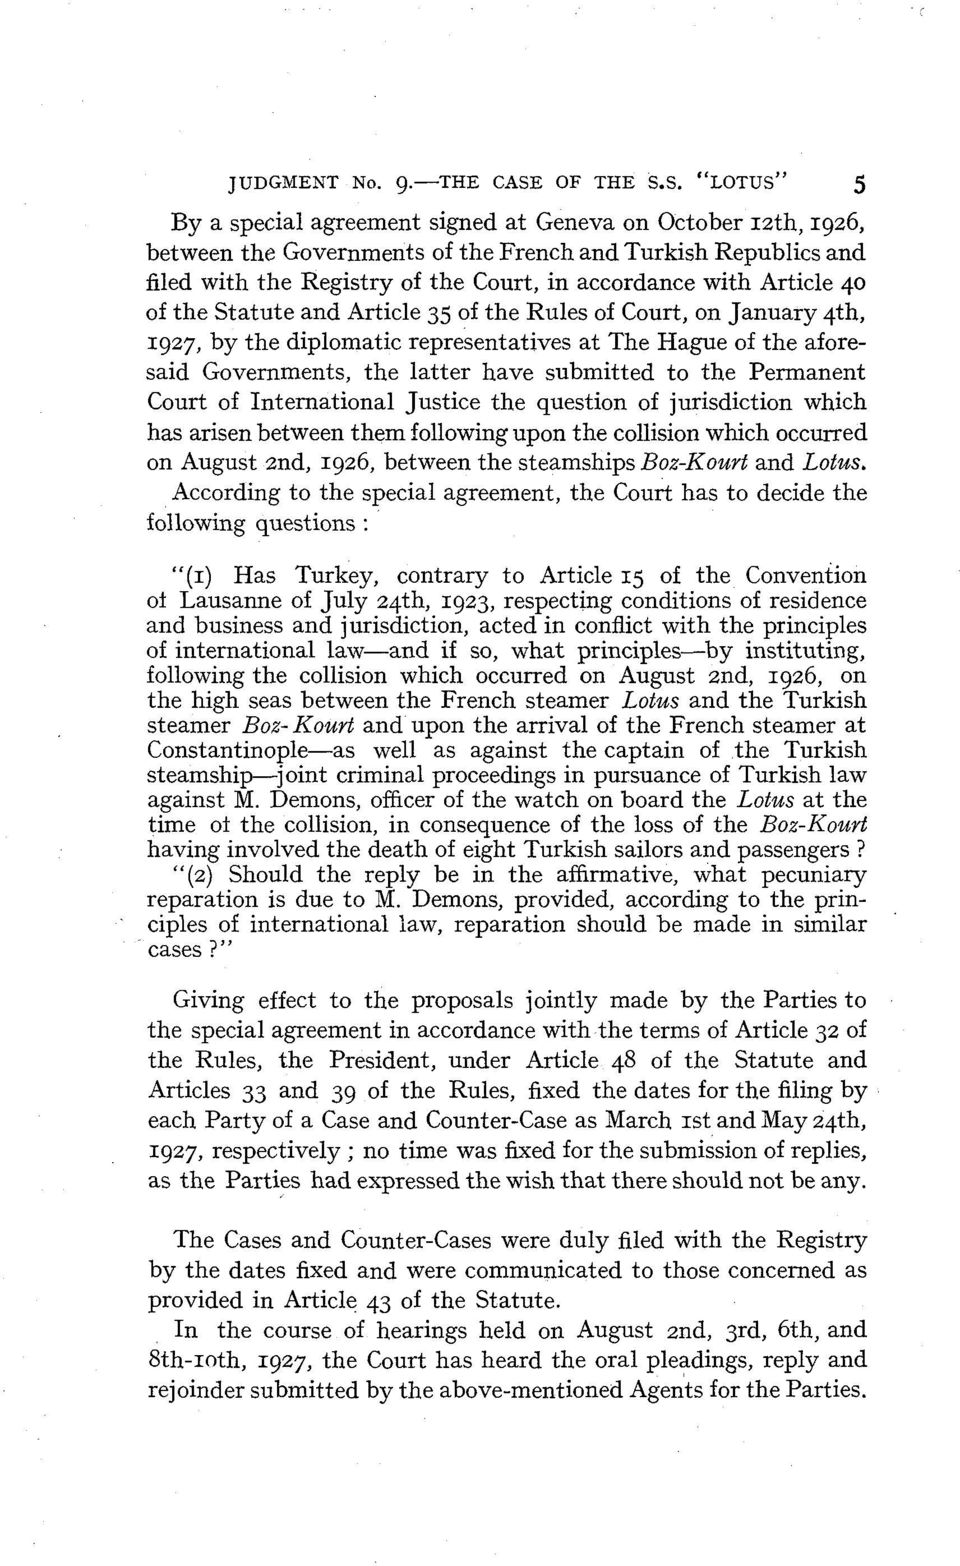 of International Justice the question of jurisdiction which has arisen between them following upon the collision which occurred on August and, 1926, between the steamships Boz-Kourt and Lotus.